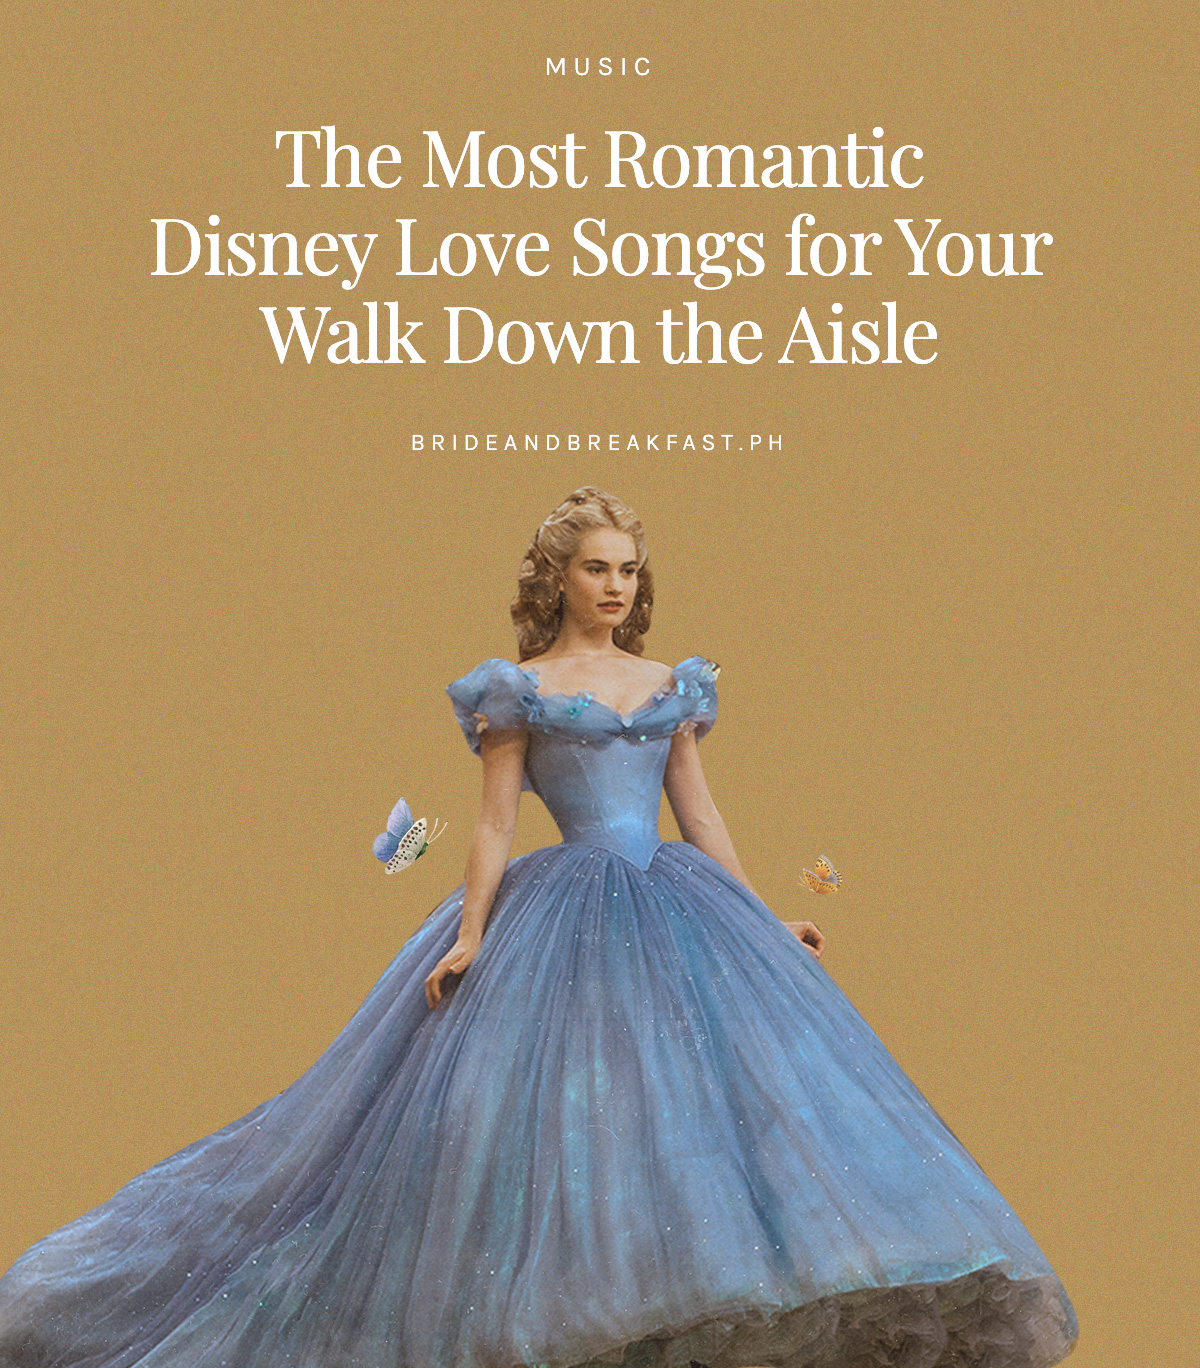 The Most Romantic Disney Love Songs for Your Walk Down the Aisle